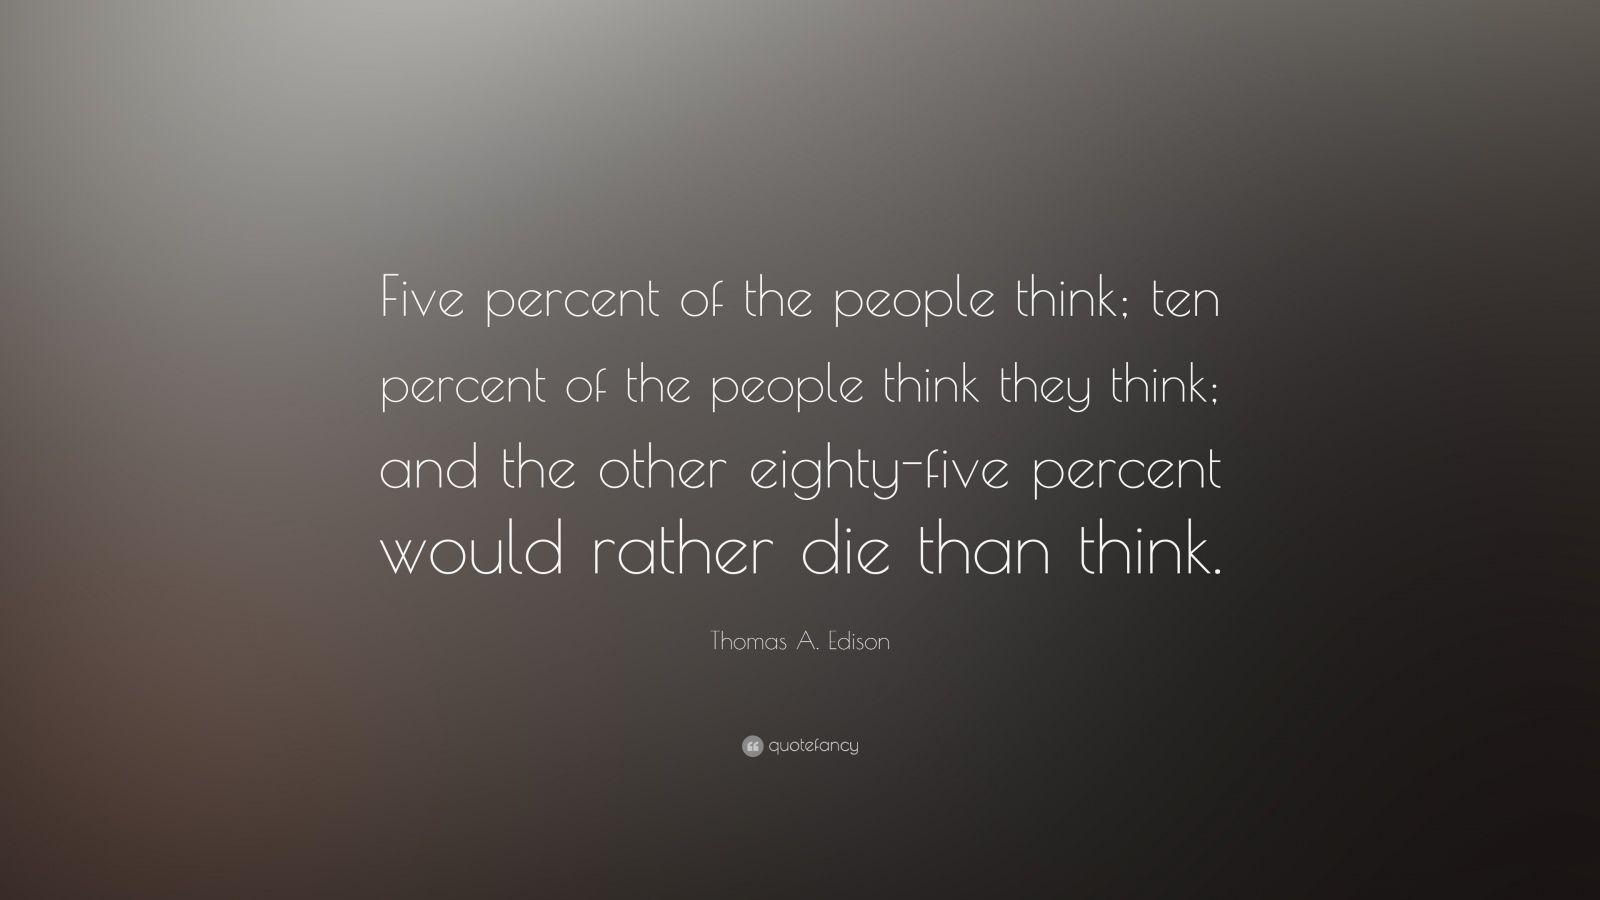 Thomas A. Edison Quote: “Five percent of the people think; ten